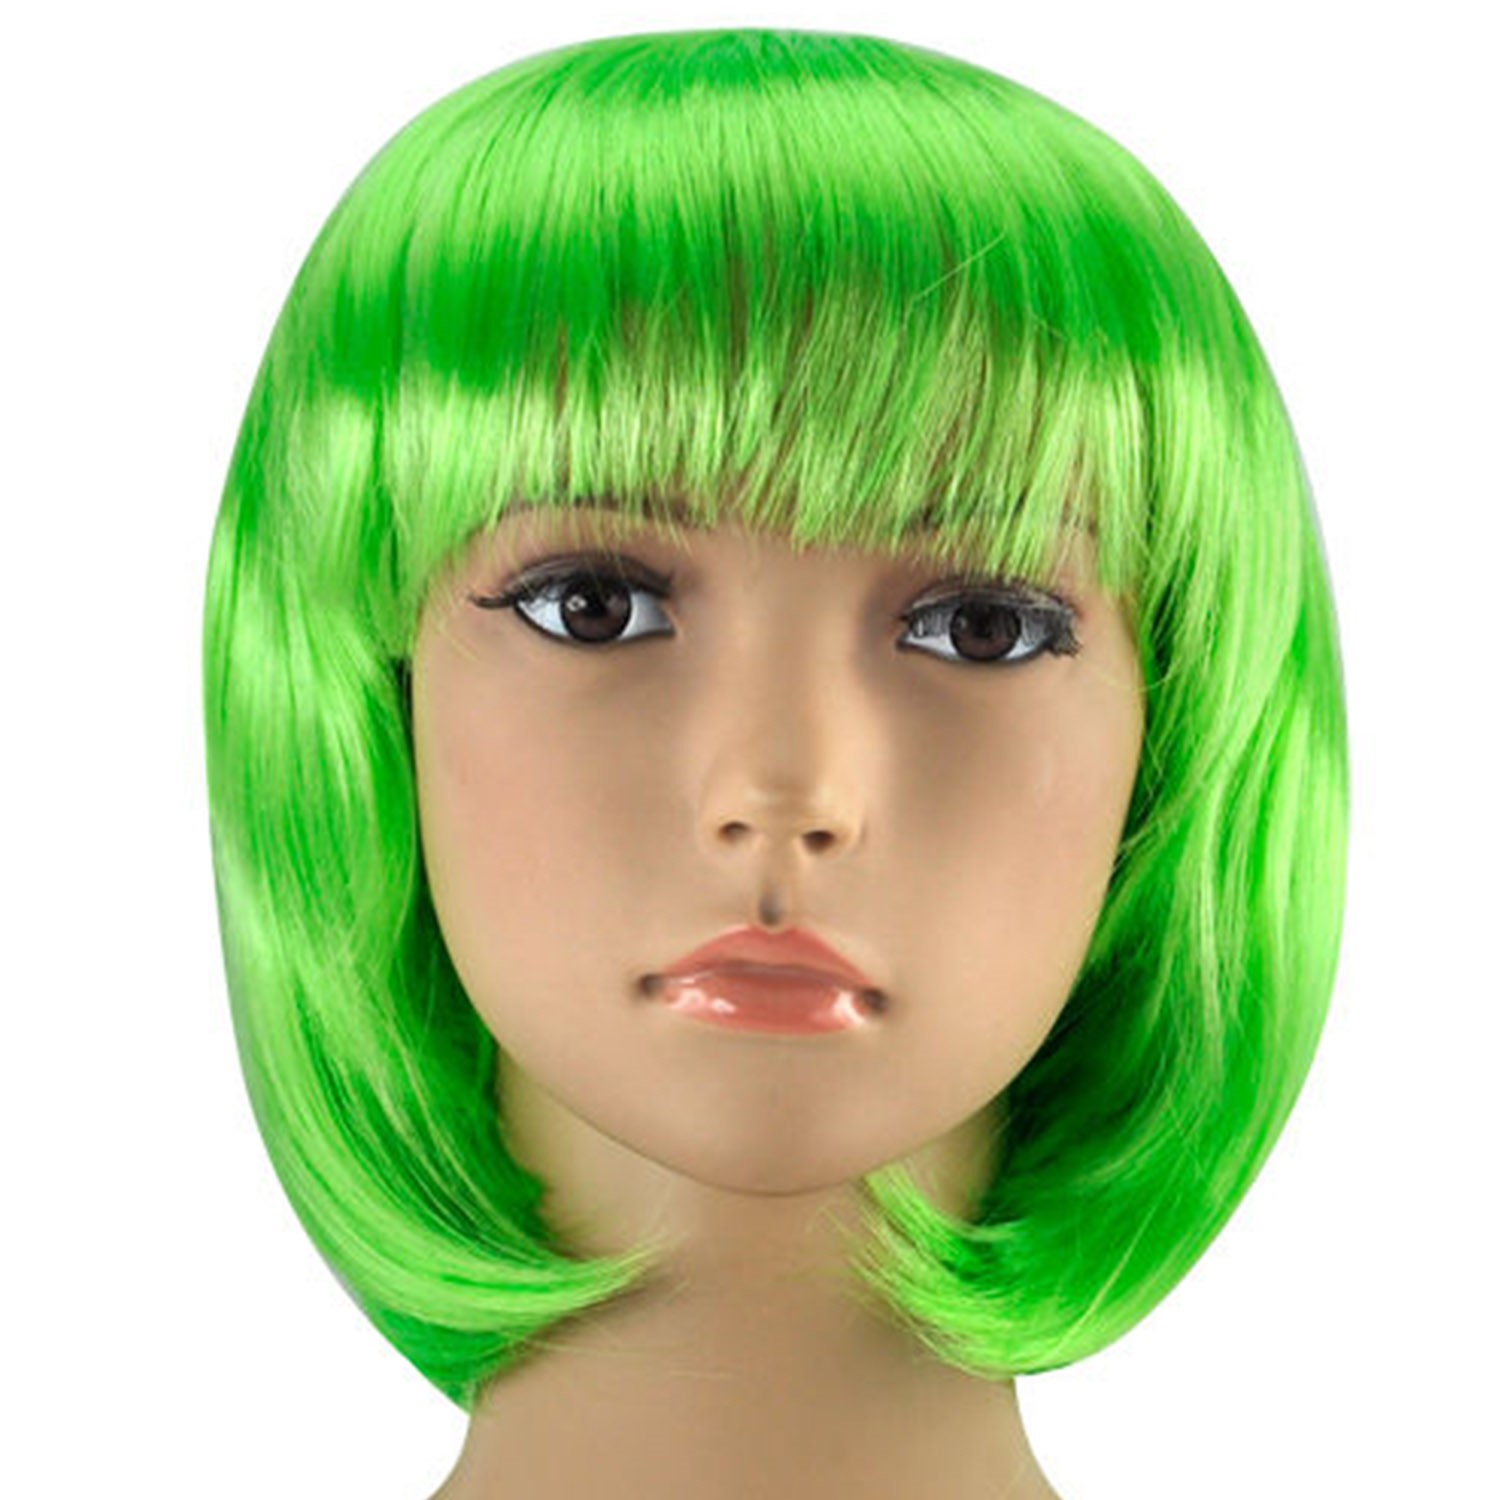 http://shared1.ad-lister.co.uk/UserImages/37a166dc-ee27-4b8a-b0b5-b888746b84f4/Img/wigs/bob_wigs/green-short-wig.JPG